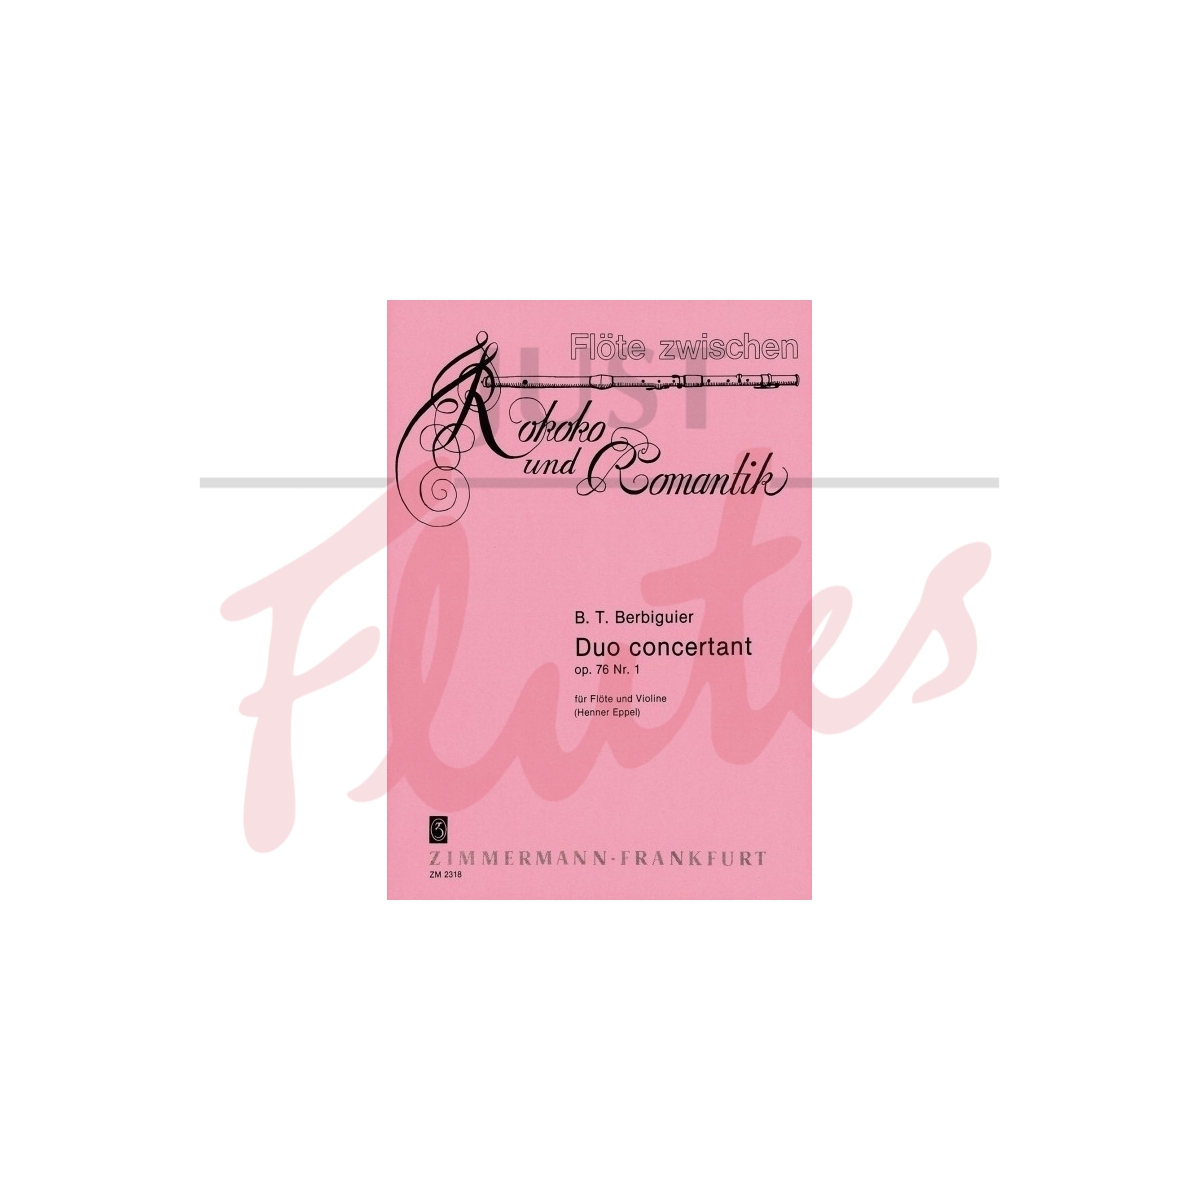 Duo Concertant for Flute and Violin